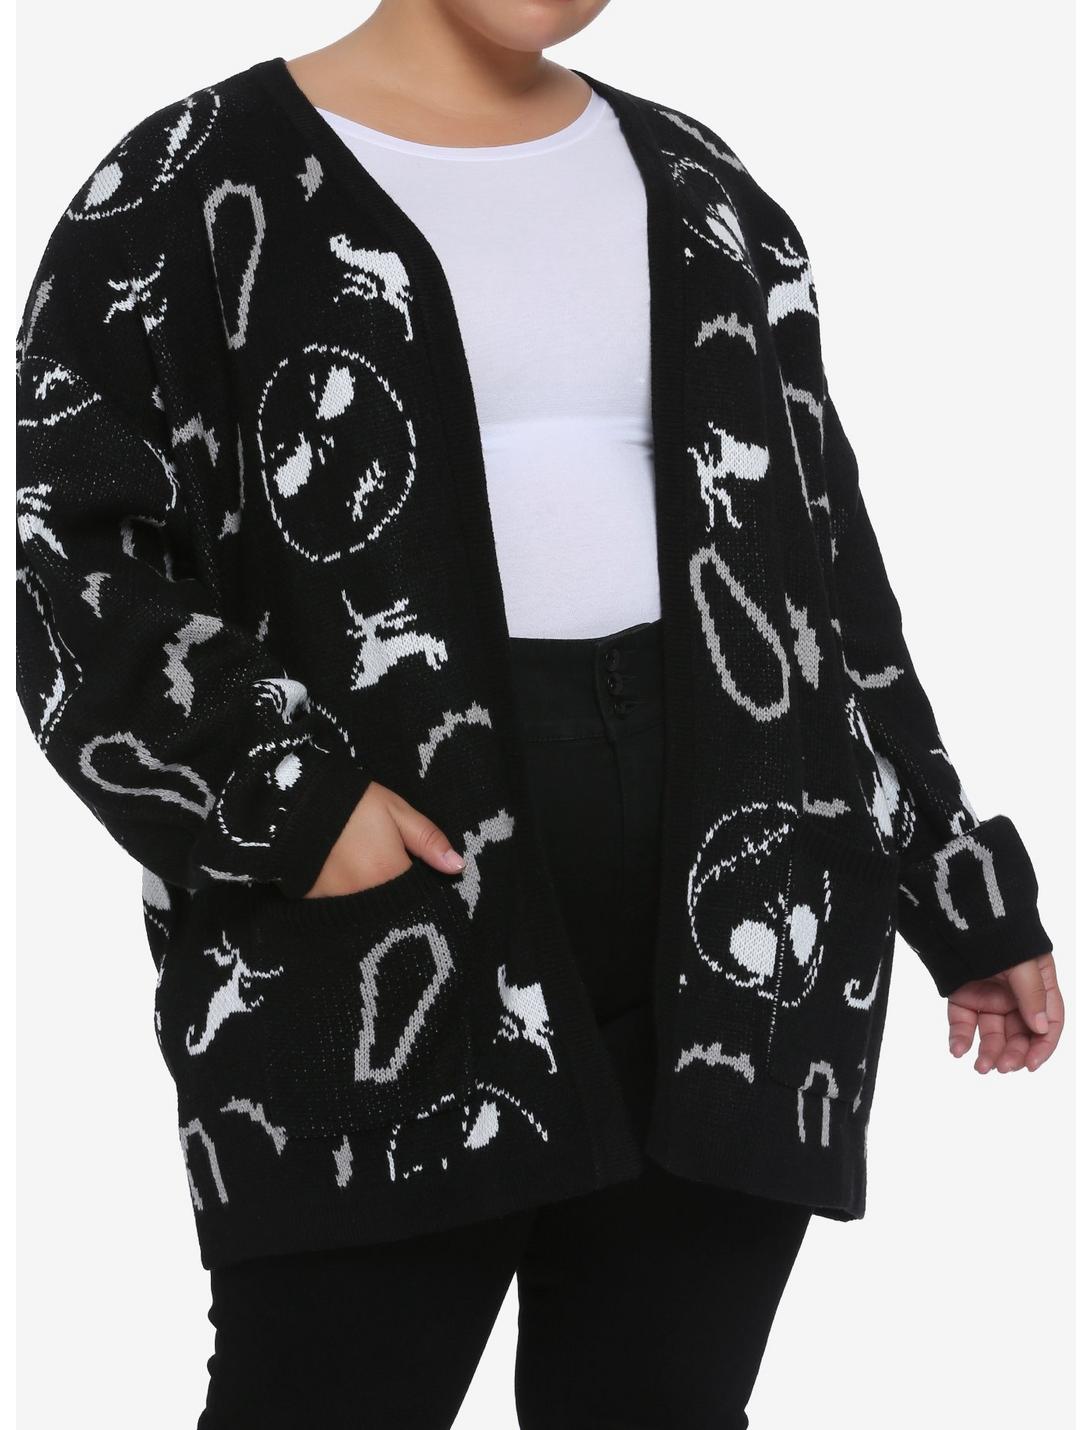 The Nightmare Before Christmas Back Lacing Open Cardigan Plus Size, MULTI, hi-res